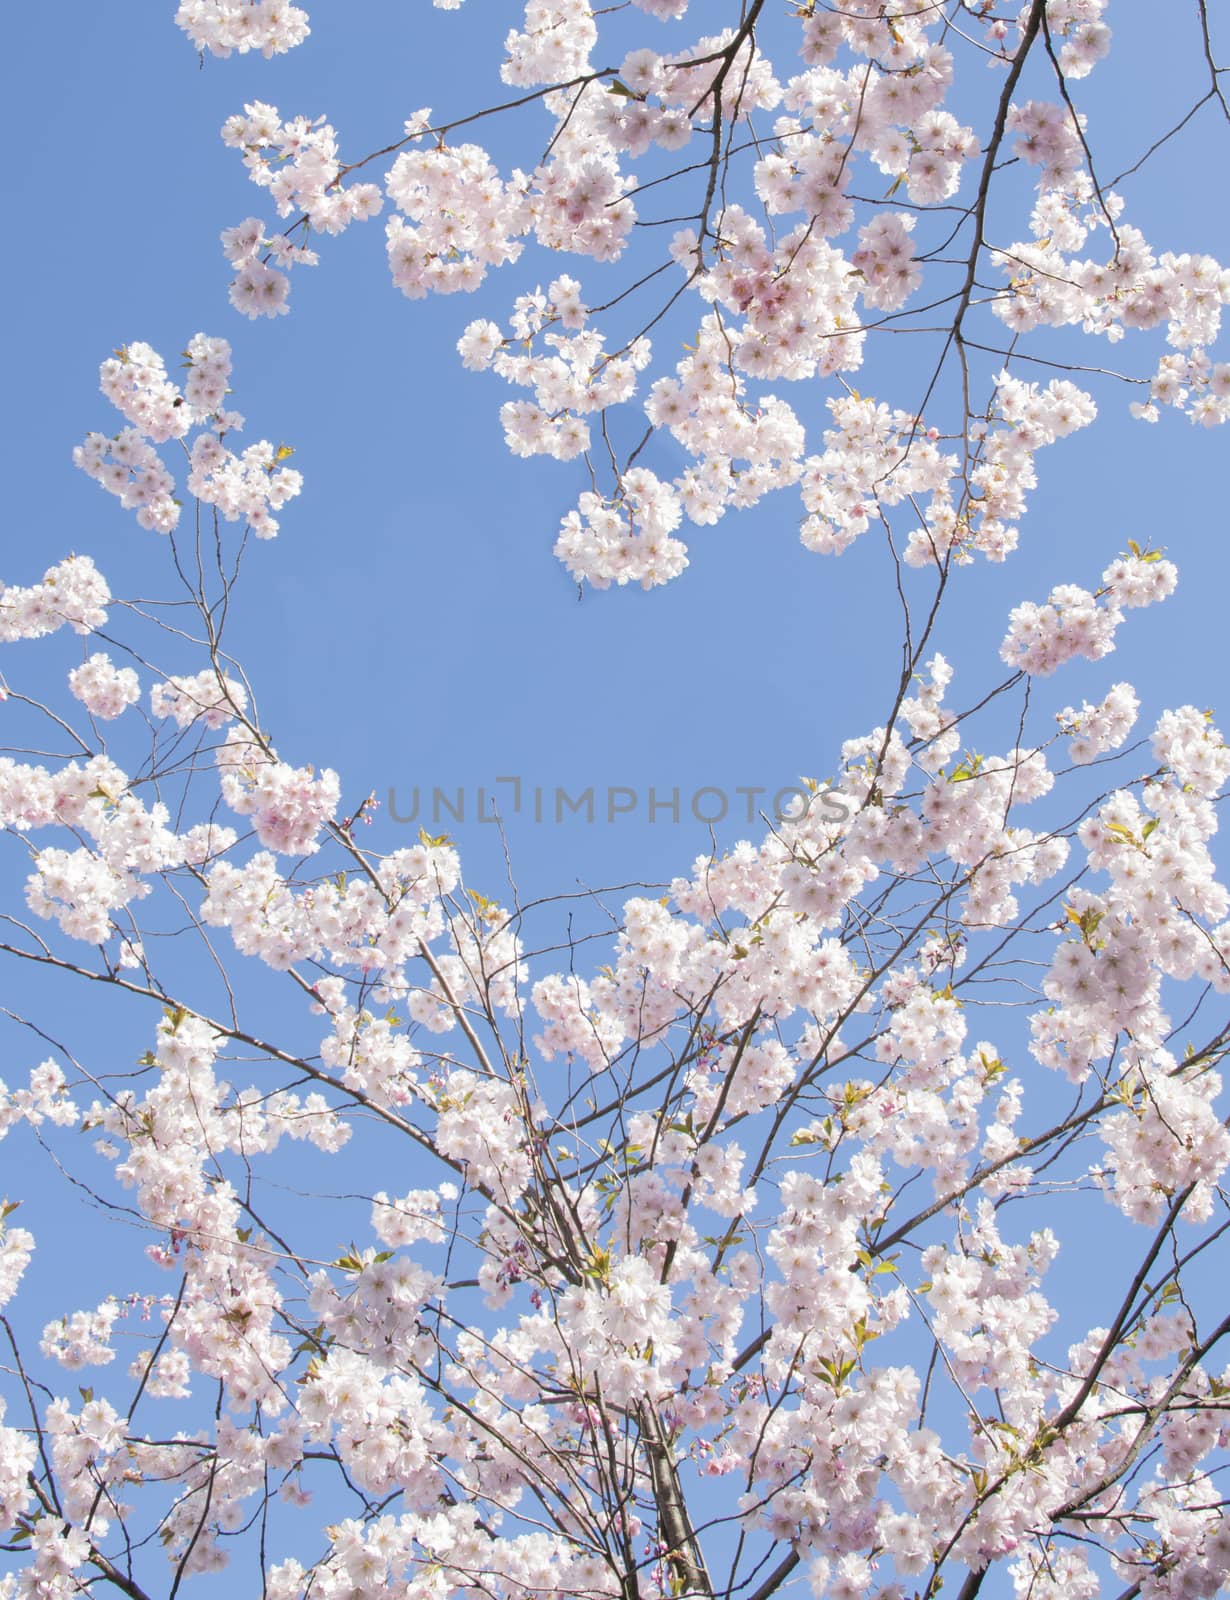 Cherry blossom background with heart shaped space by ArtesiaWells